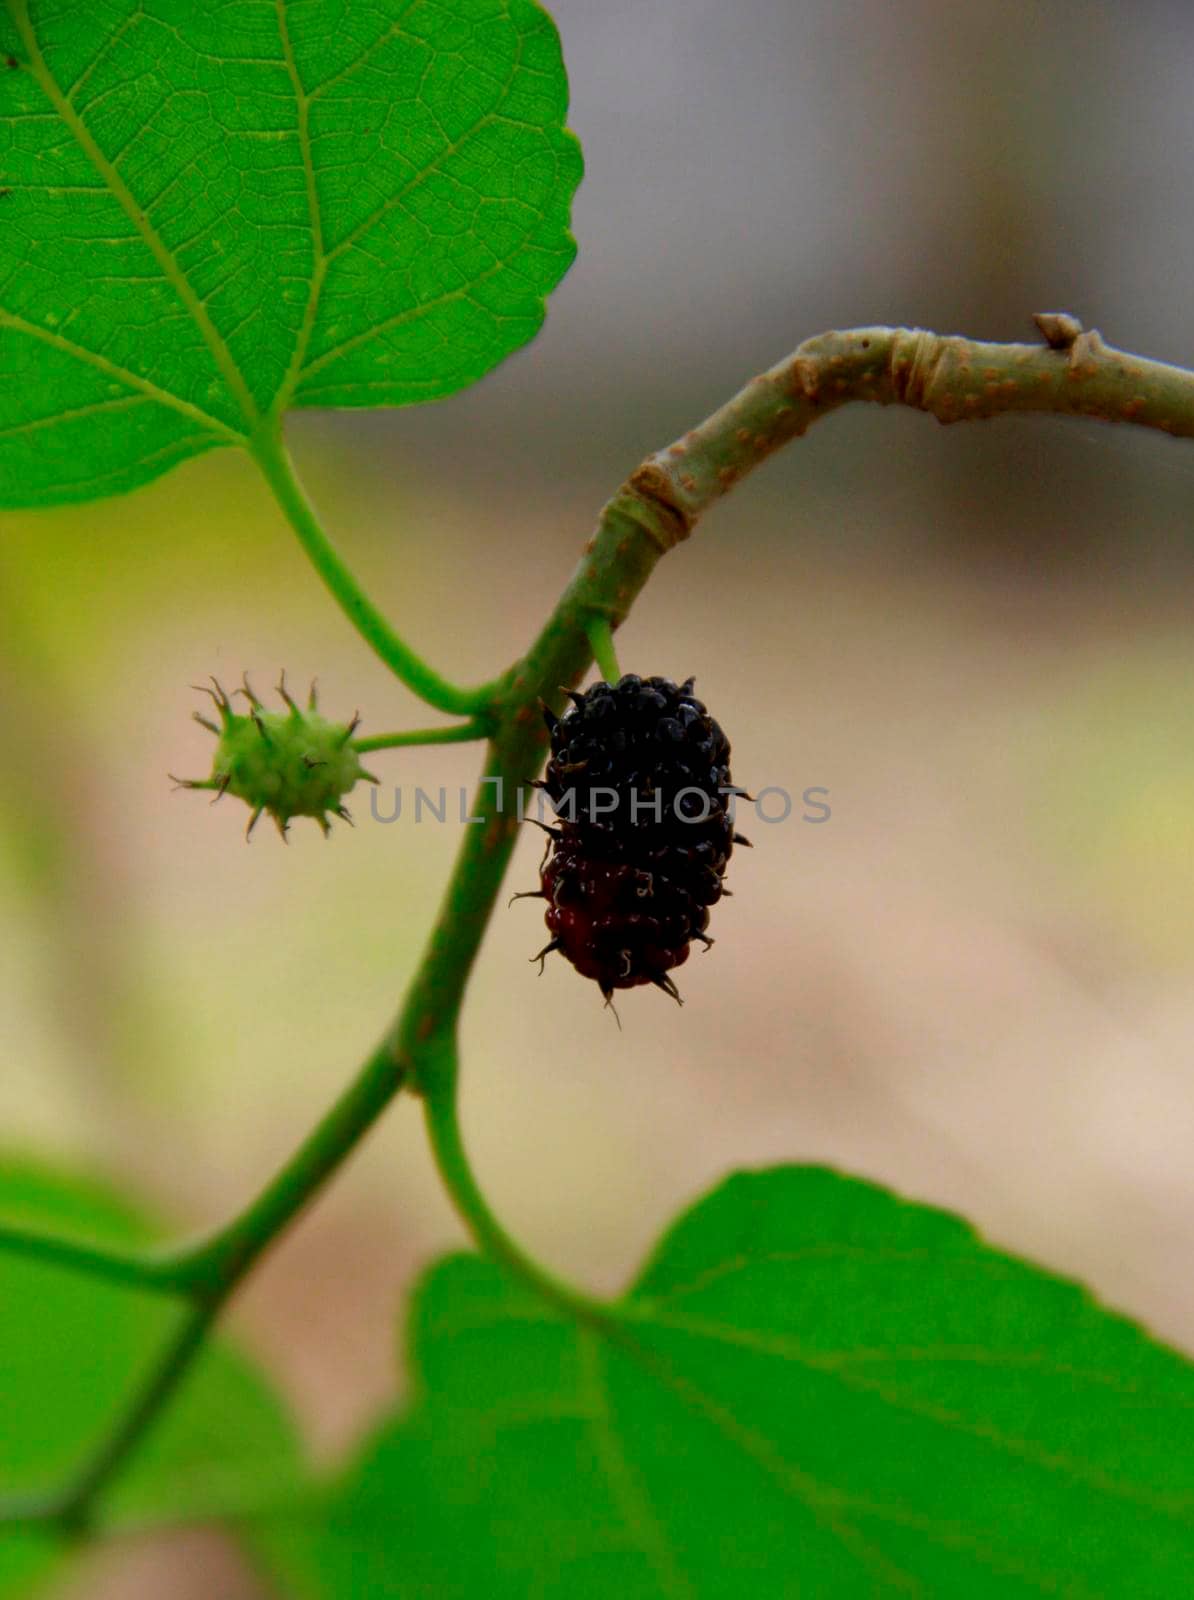 salvador, bahia / brazil - july 26, 2014: blackberry fruit is seen on a plant in the city of Salvador.


